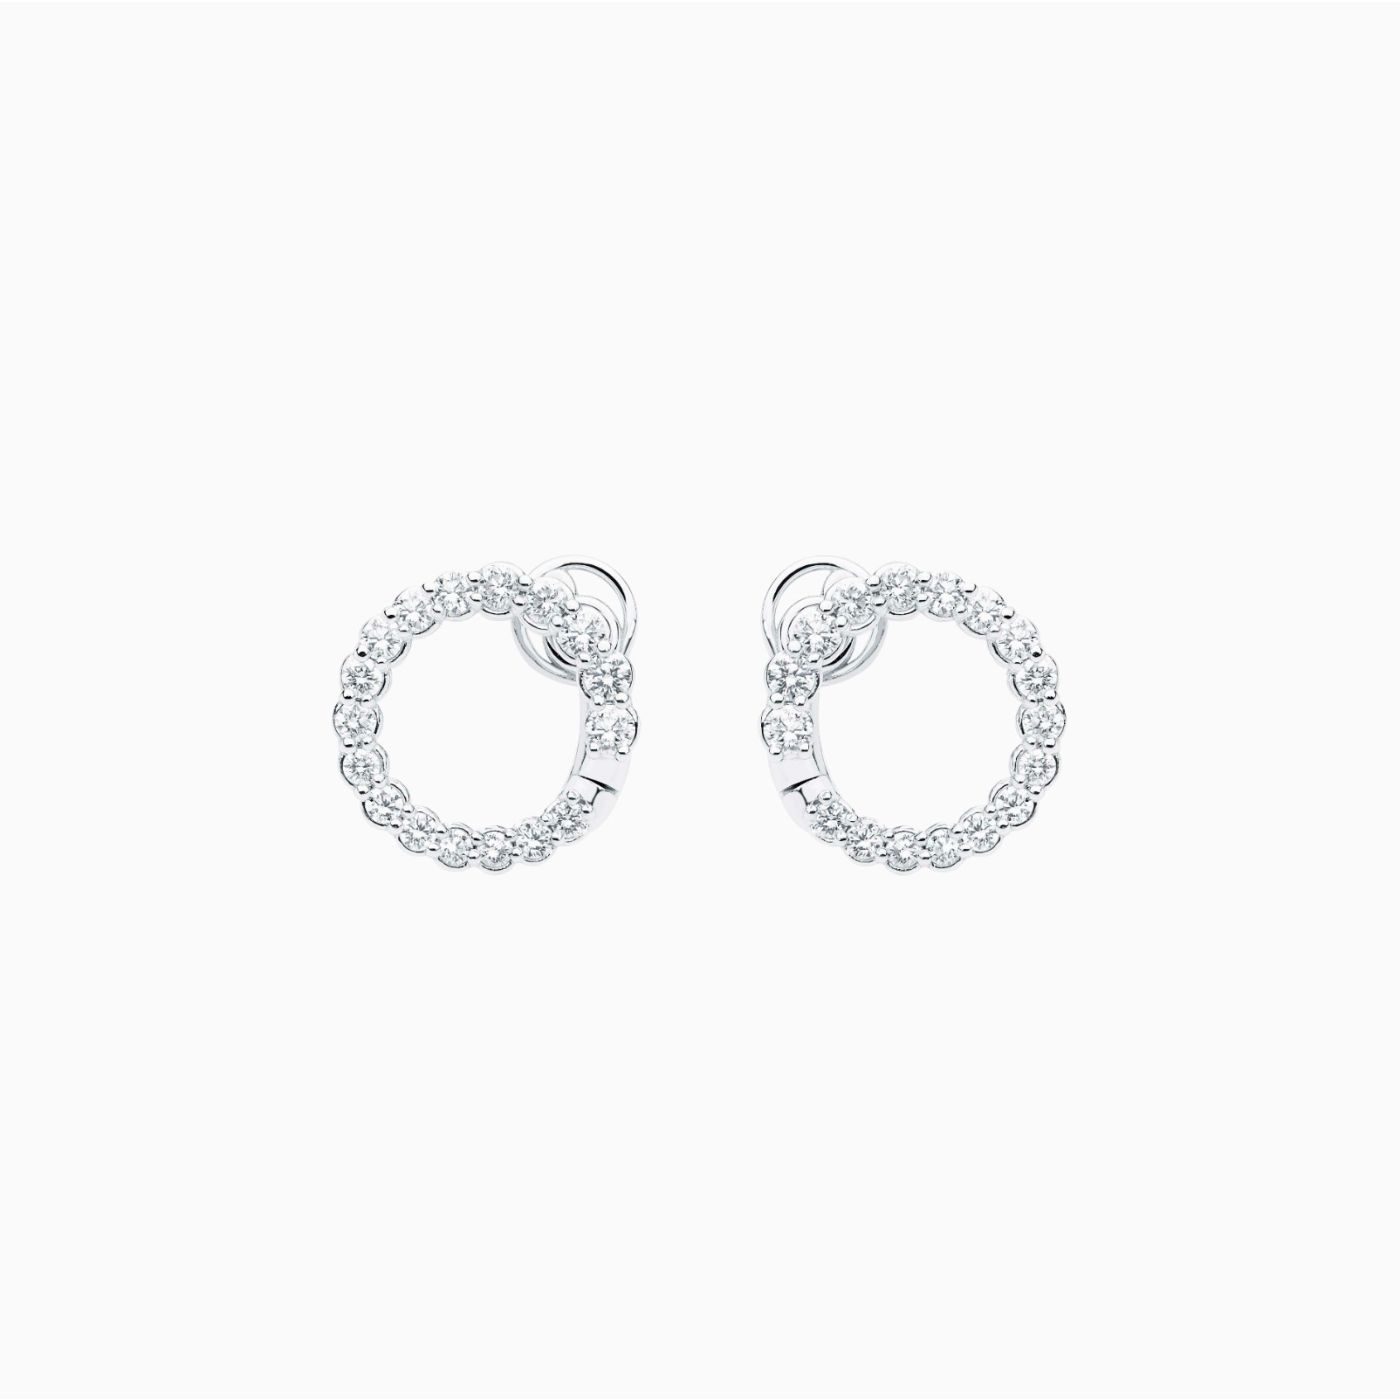 White gold ring earrings with bright size diamonds.